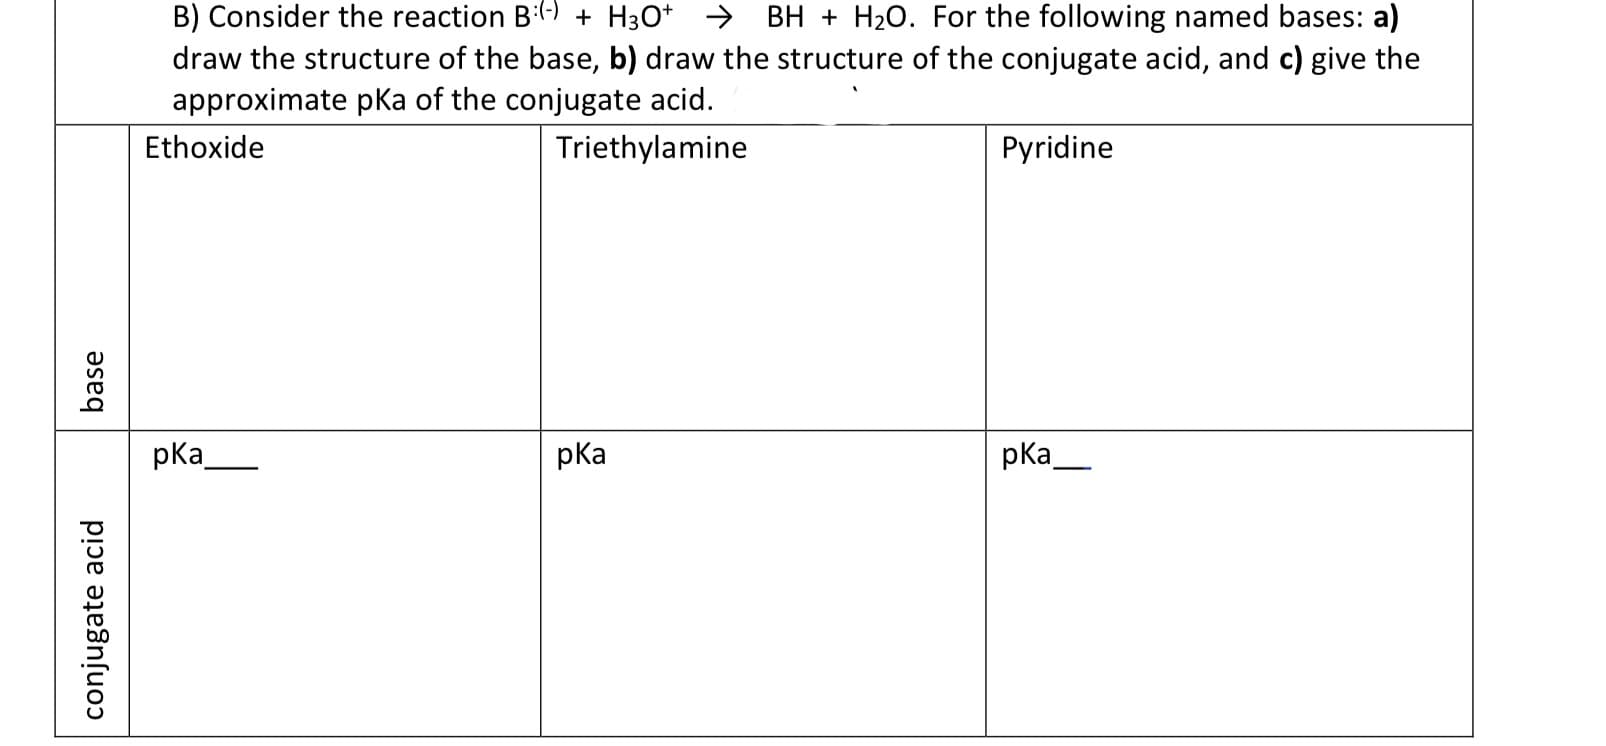 B) Consider the reaction Bi() + H3O* → BH + H20. For the following named bases: a)
draw the structure of the base, b) draw the structure of the conjugate acid, and c) give the
approximate pKa of the conjugate acid.
Ethoxide
Triethylamine
Pyridine
